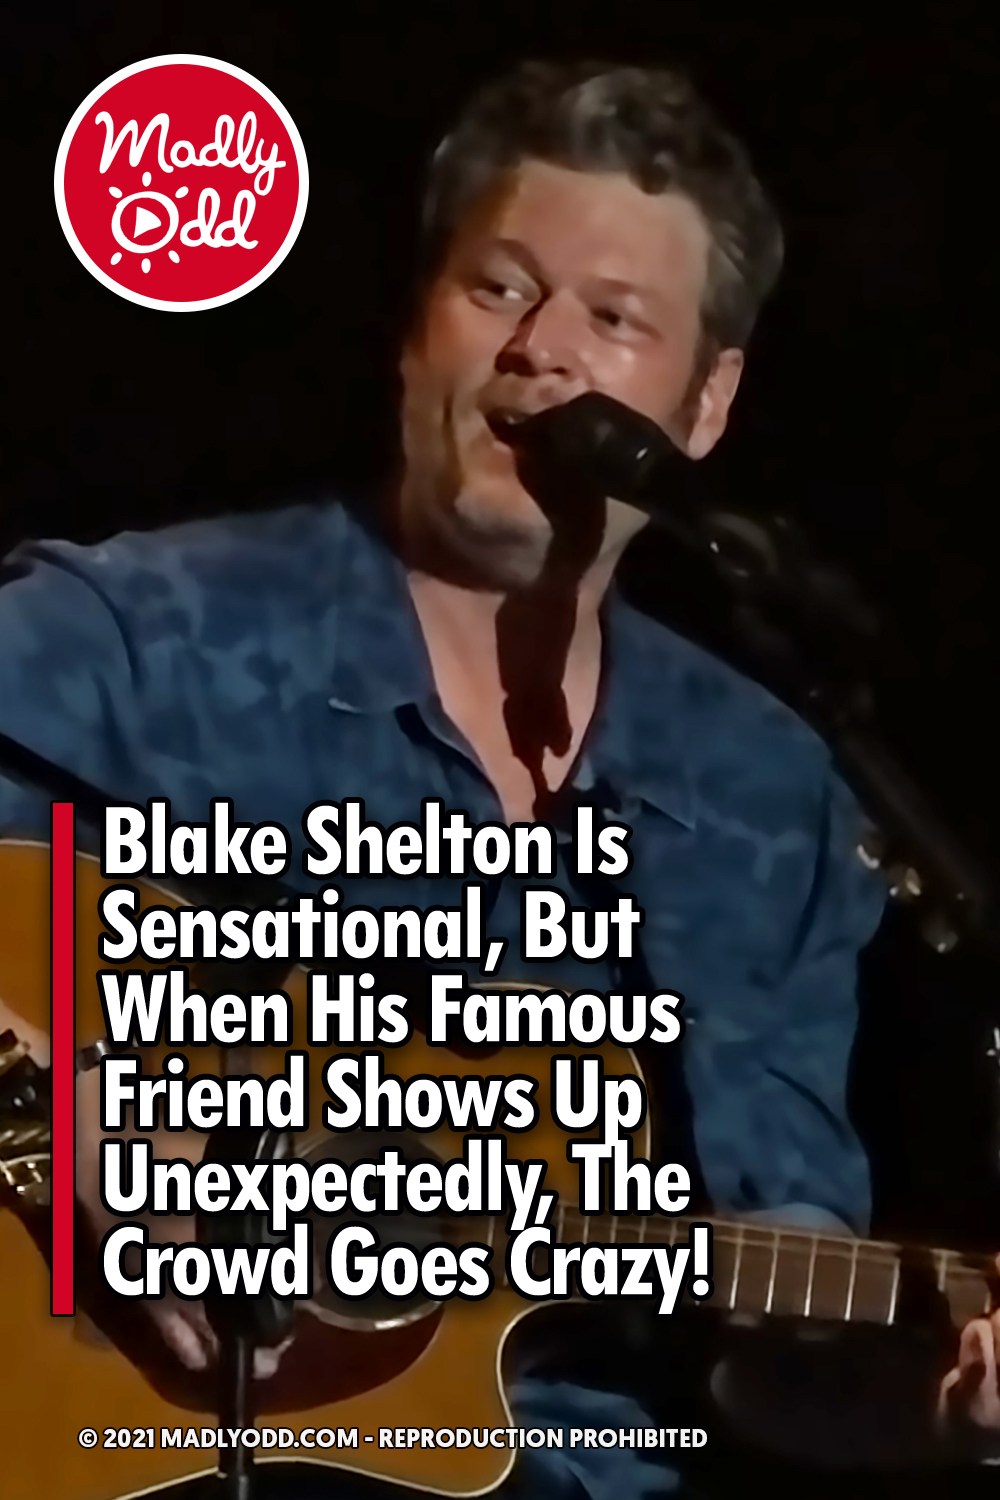 Blake Shelton Is Sensational, But When His Famous Friend Shows Up Unexpectedly, The Crowd Goes Crazy!